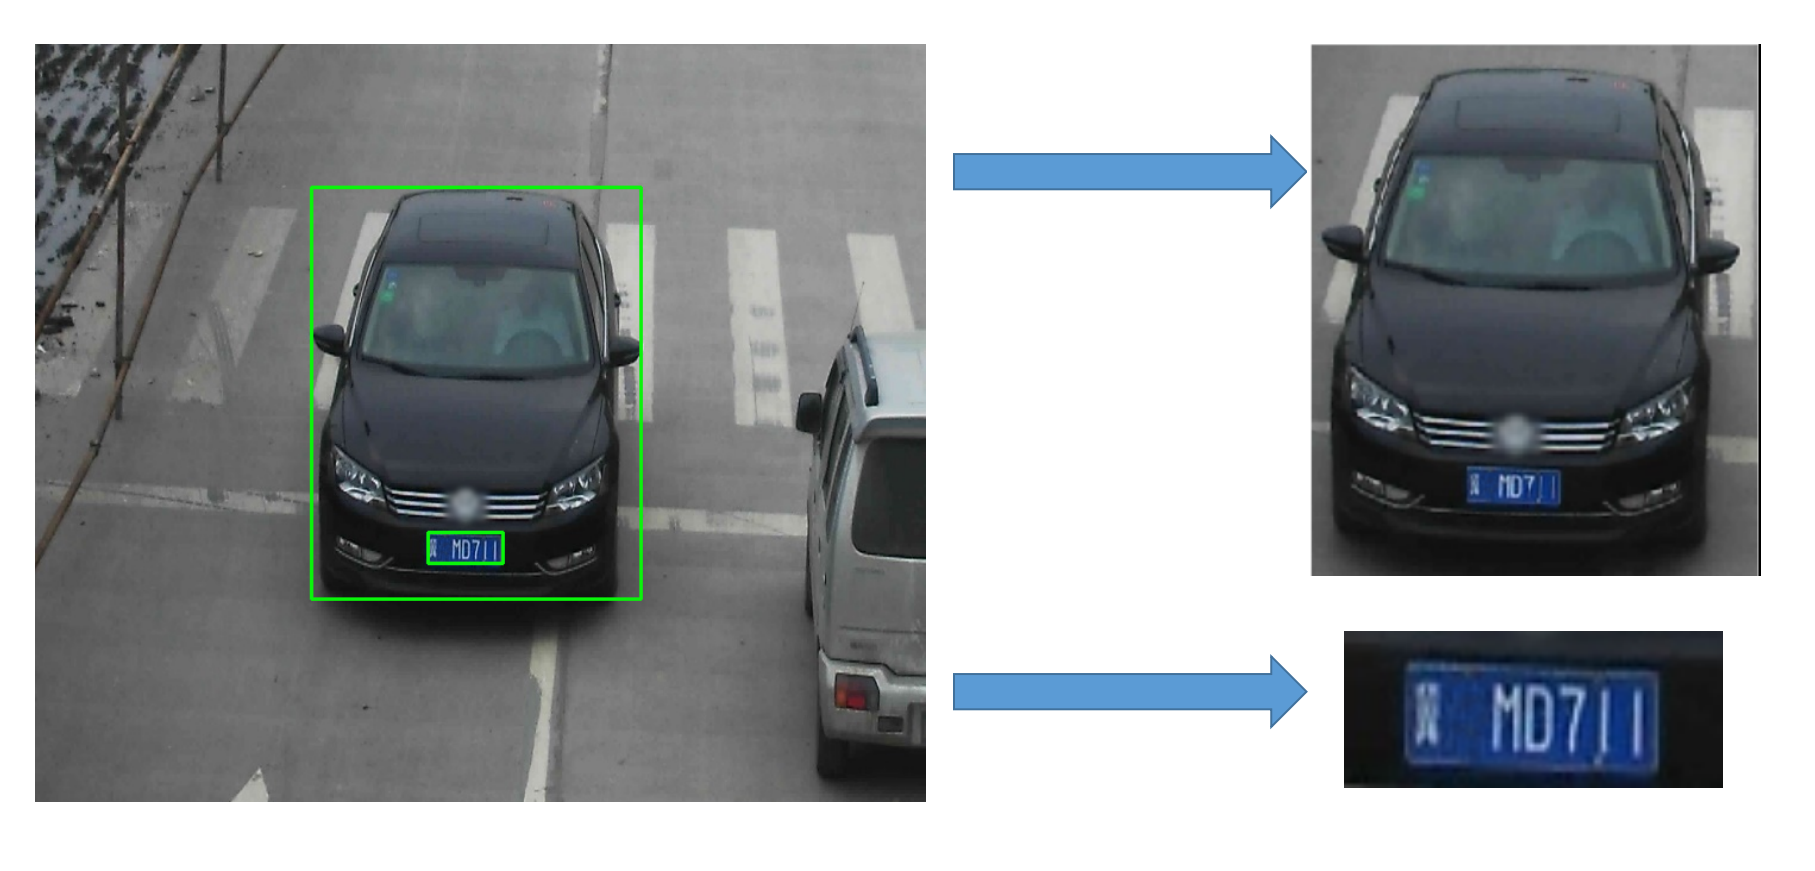 vehicle-license-plate-detection-barrier-0106